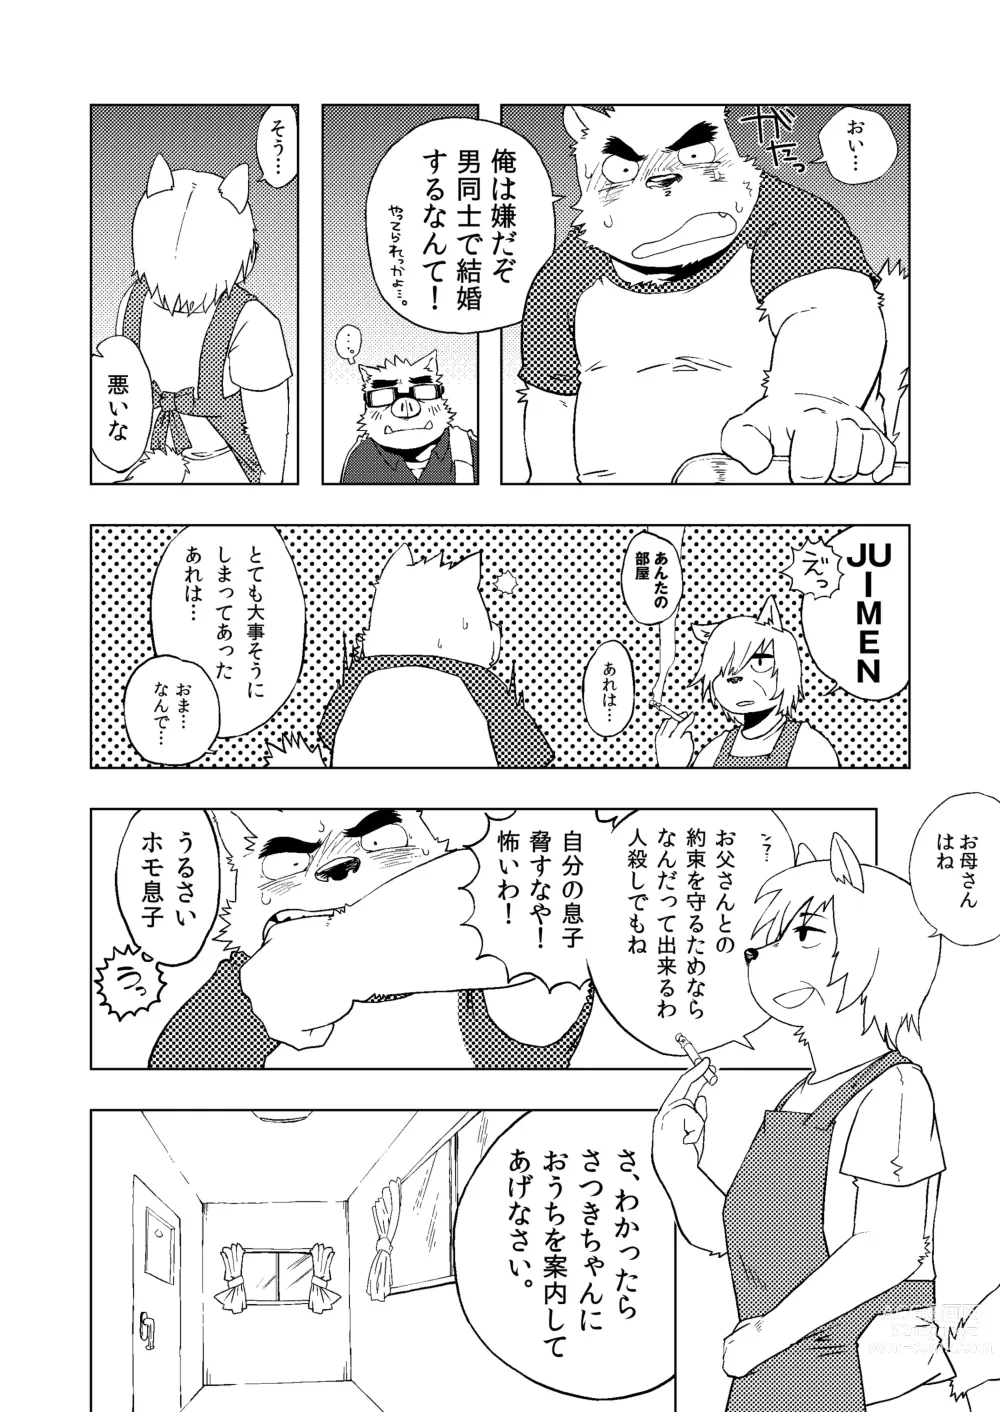 Page 6 of doujinshi Is it true that you are getting married!?